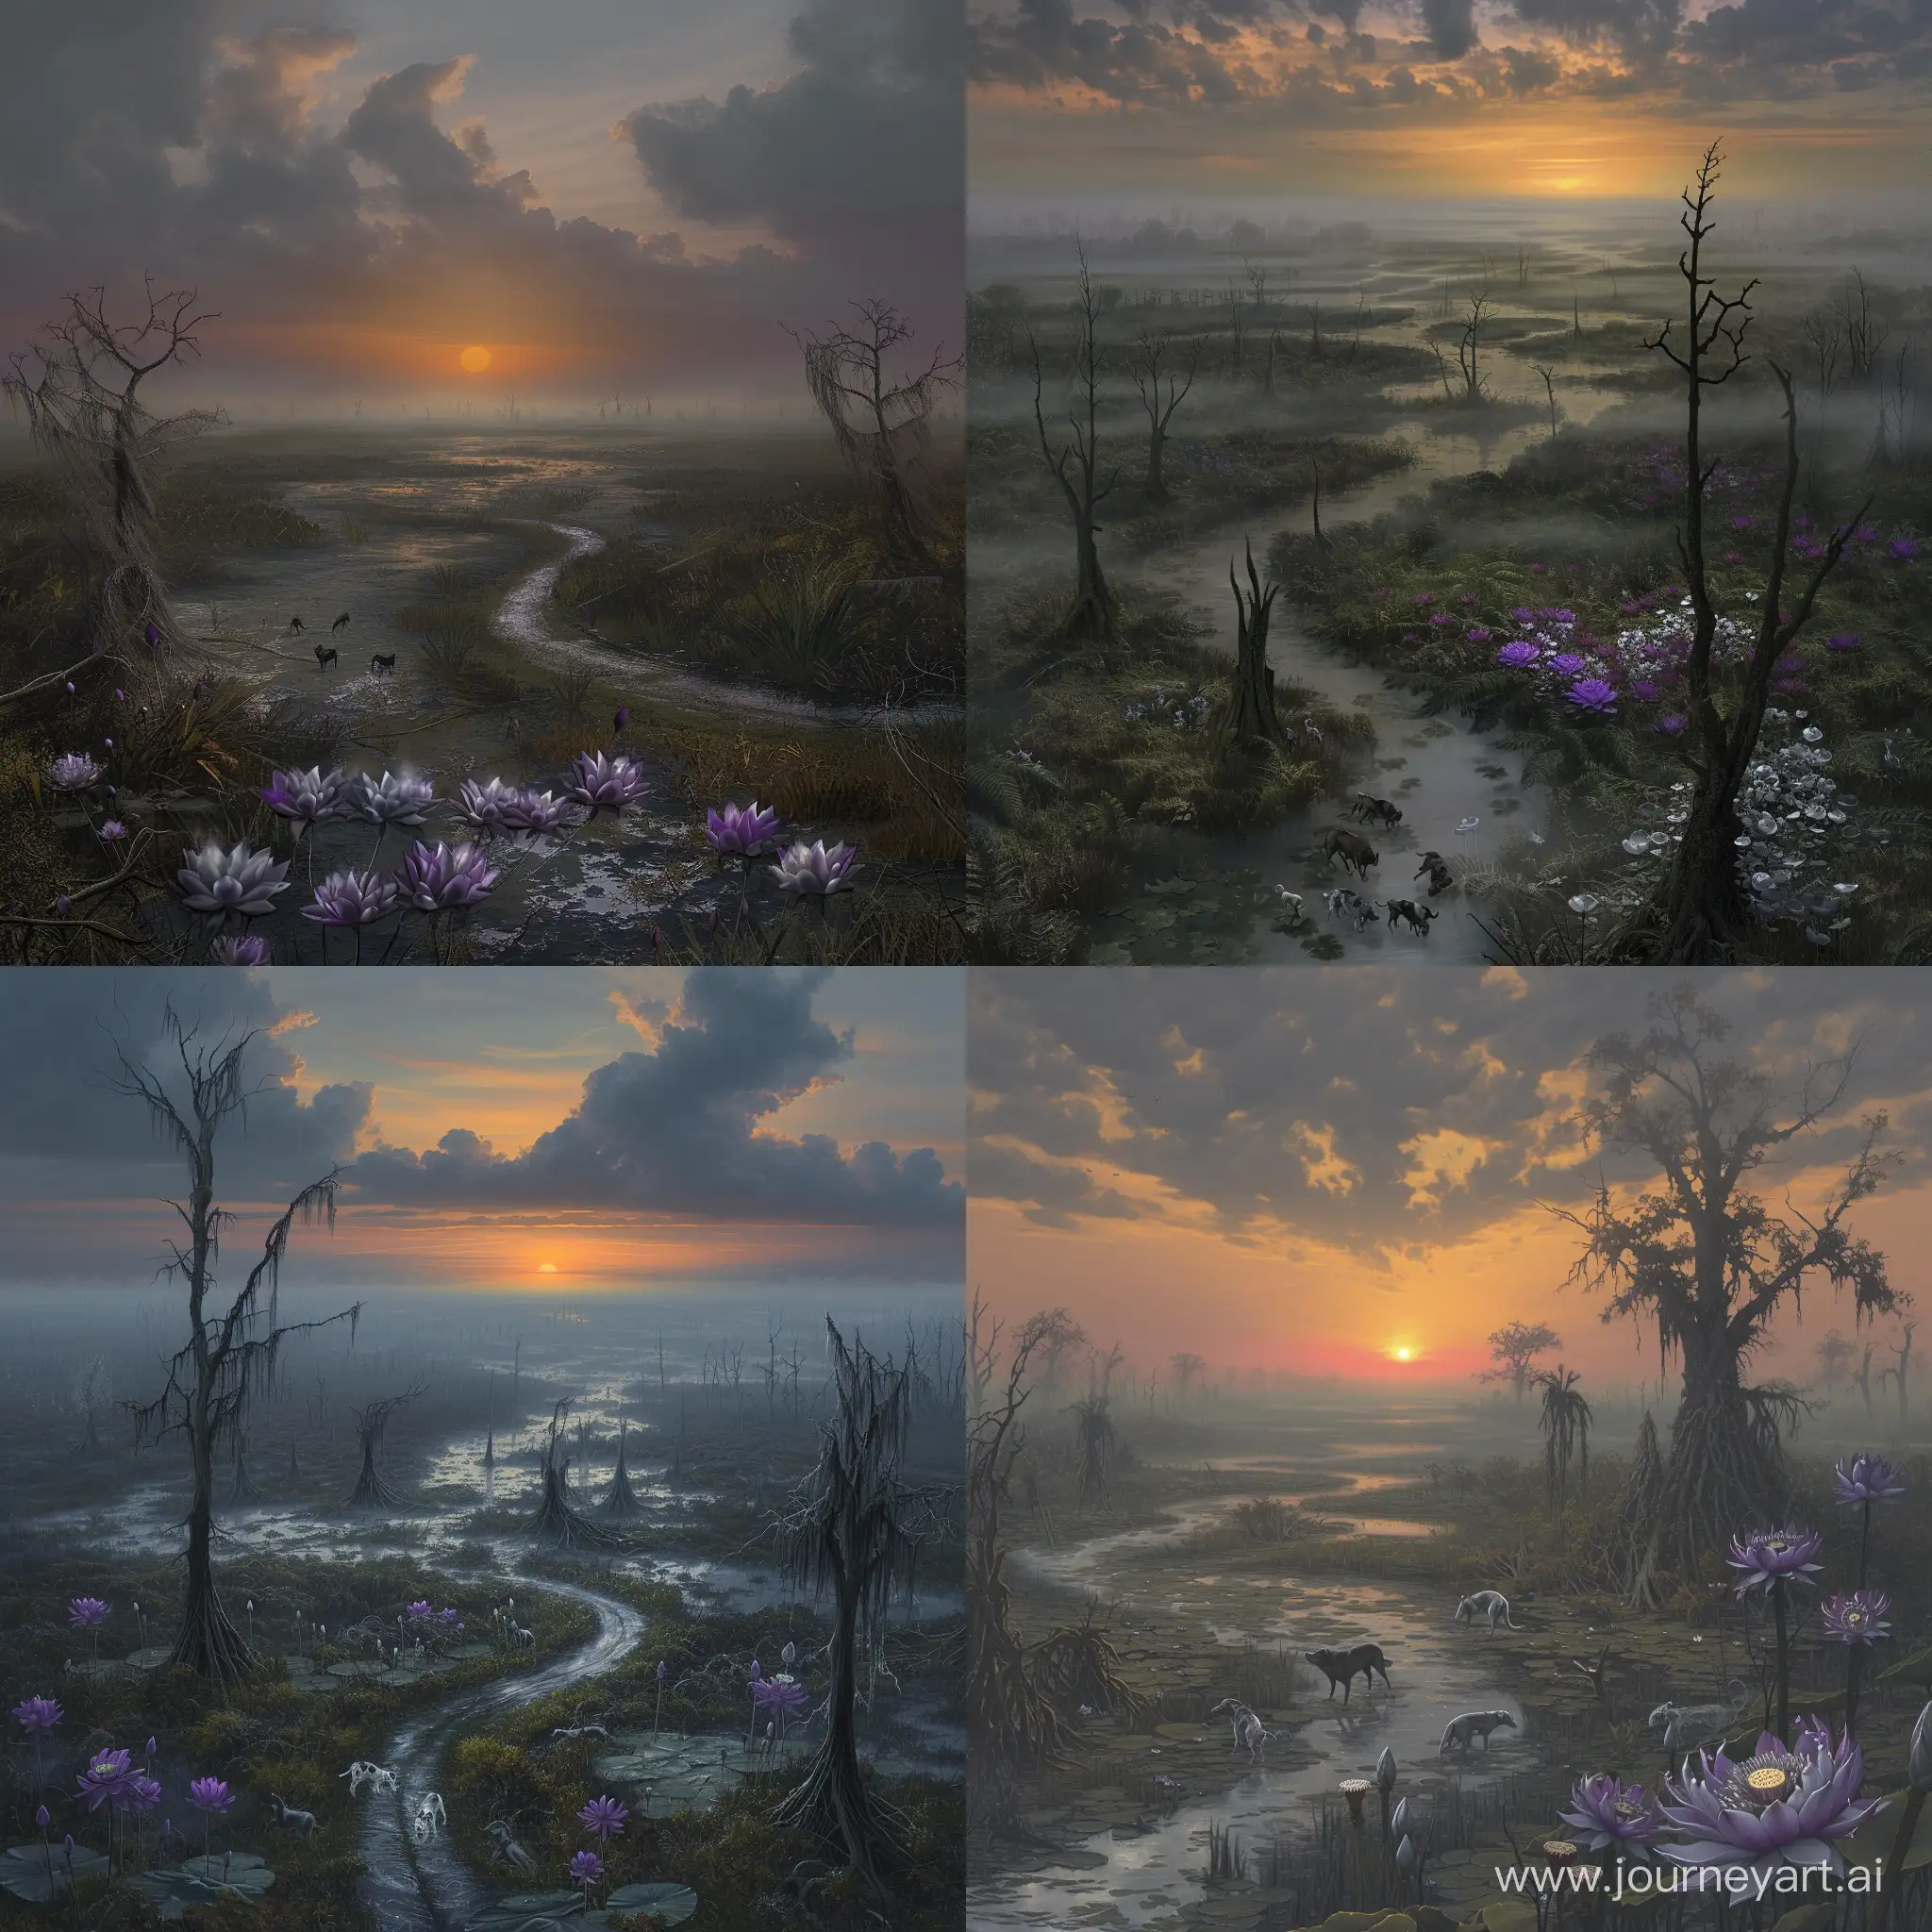 marshland, a dense fog with a hint of evil in it, a low distant sunset, diseased trees, purple and silver lotus blossoms, wild dogs, a winding road passing through the swamp